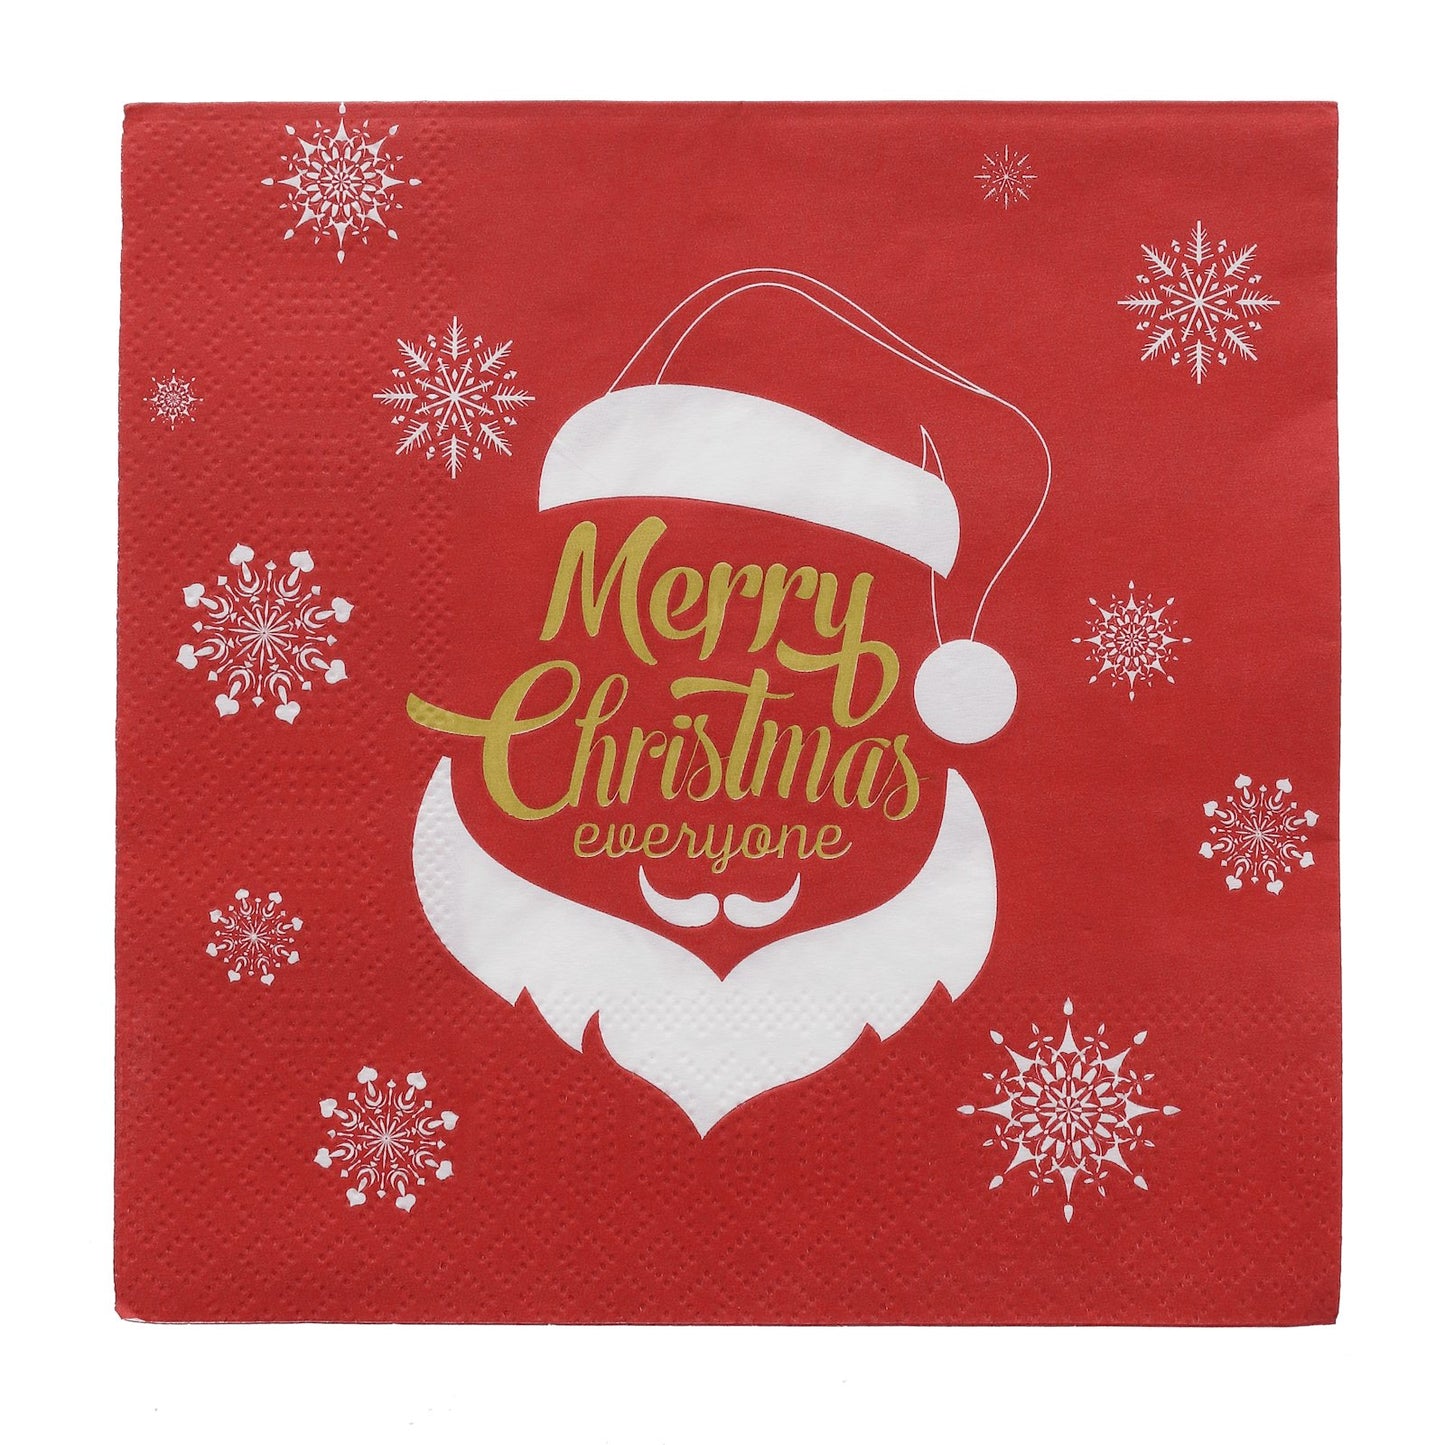 single red merry christmas everyone napkin featuring snowflake pattern with santa head outline